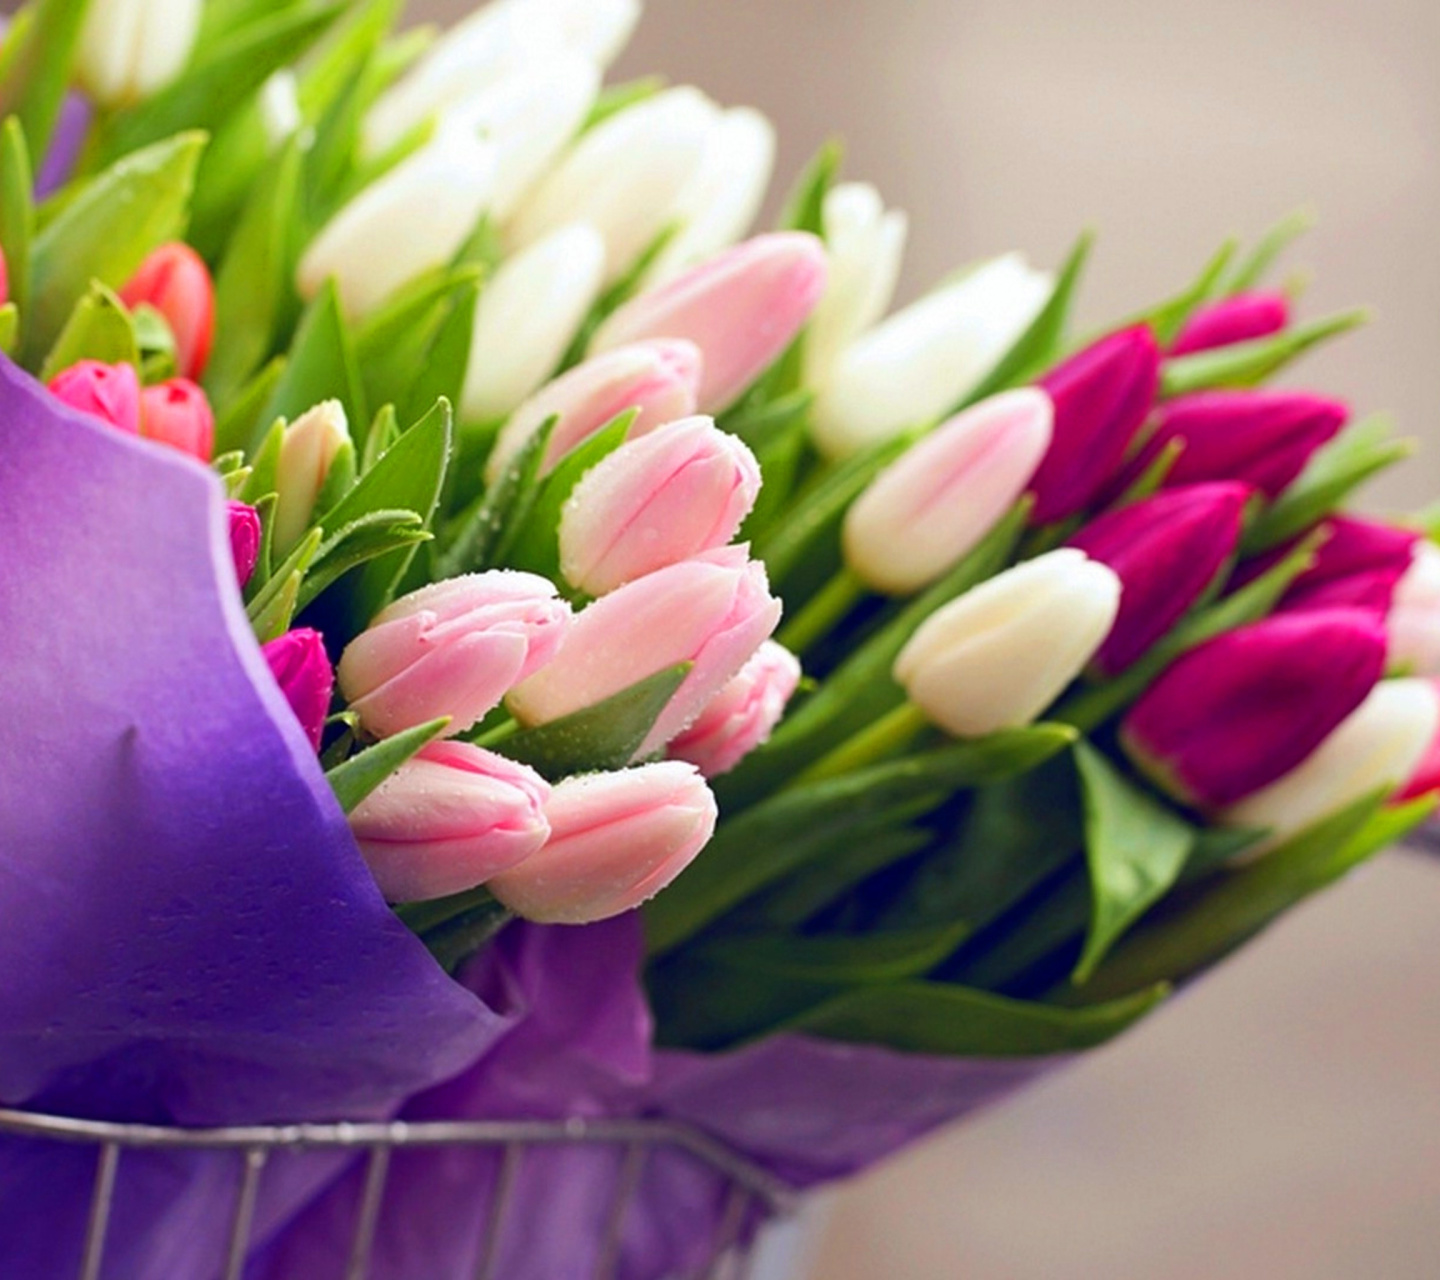 Tulips for You wallpaper 1440x1280